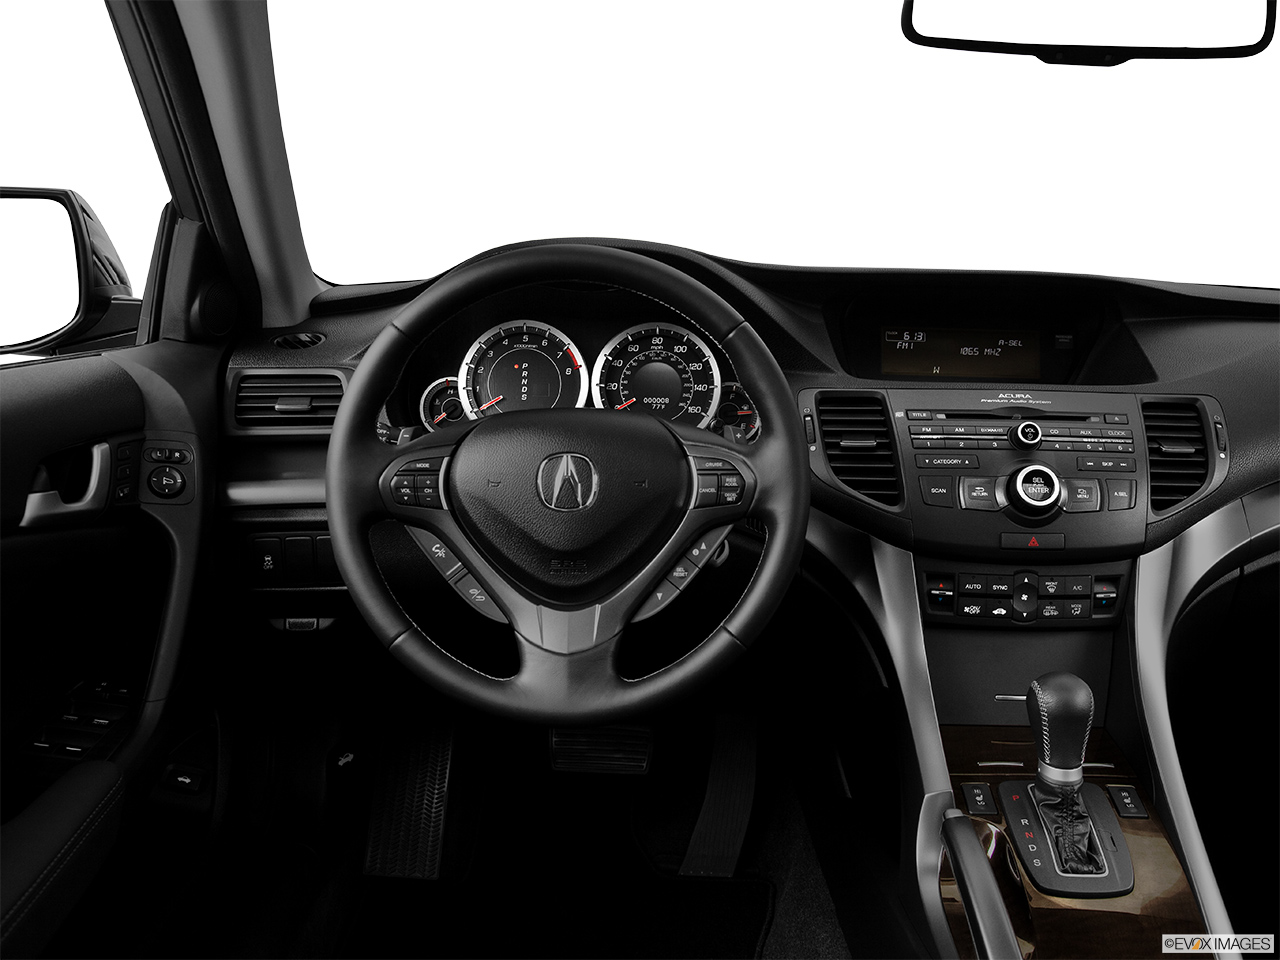 2014 Acura TSX 5-speed Automatic Steering wheel/Center Console. 